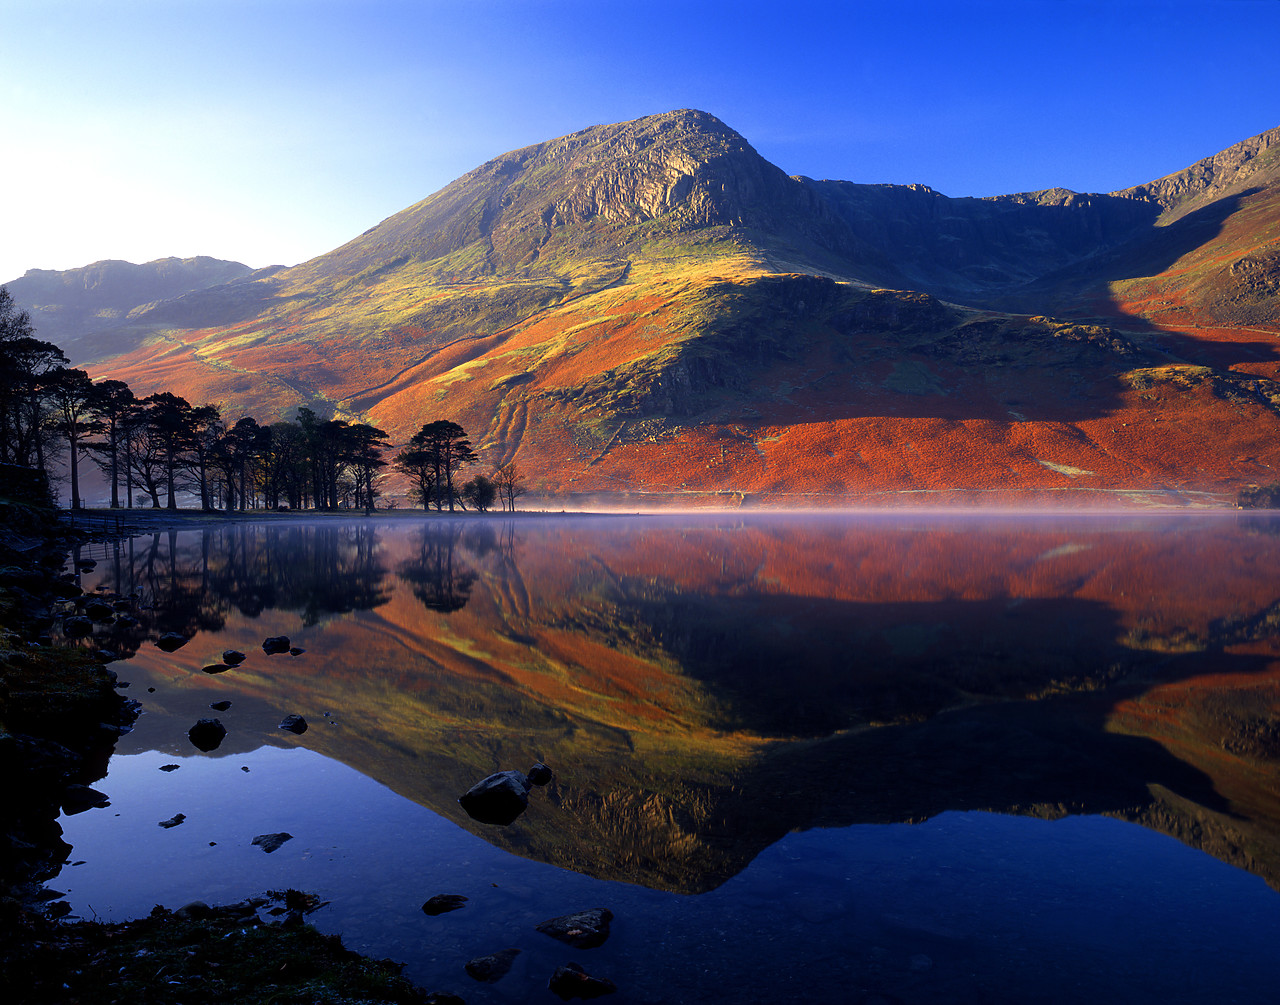 #871134-1 - Lake Buttermere Reflections, Lake District National Park, Cumbria, England